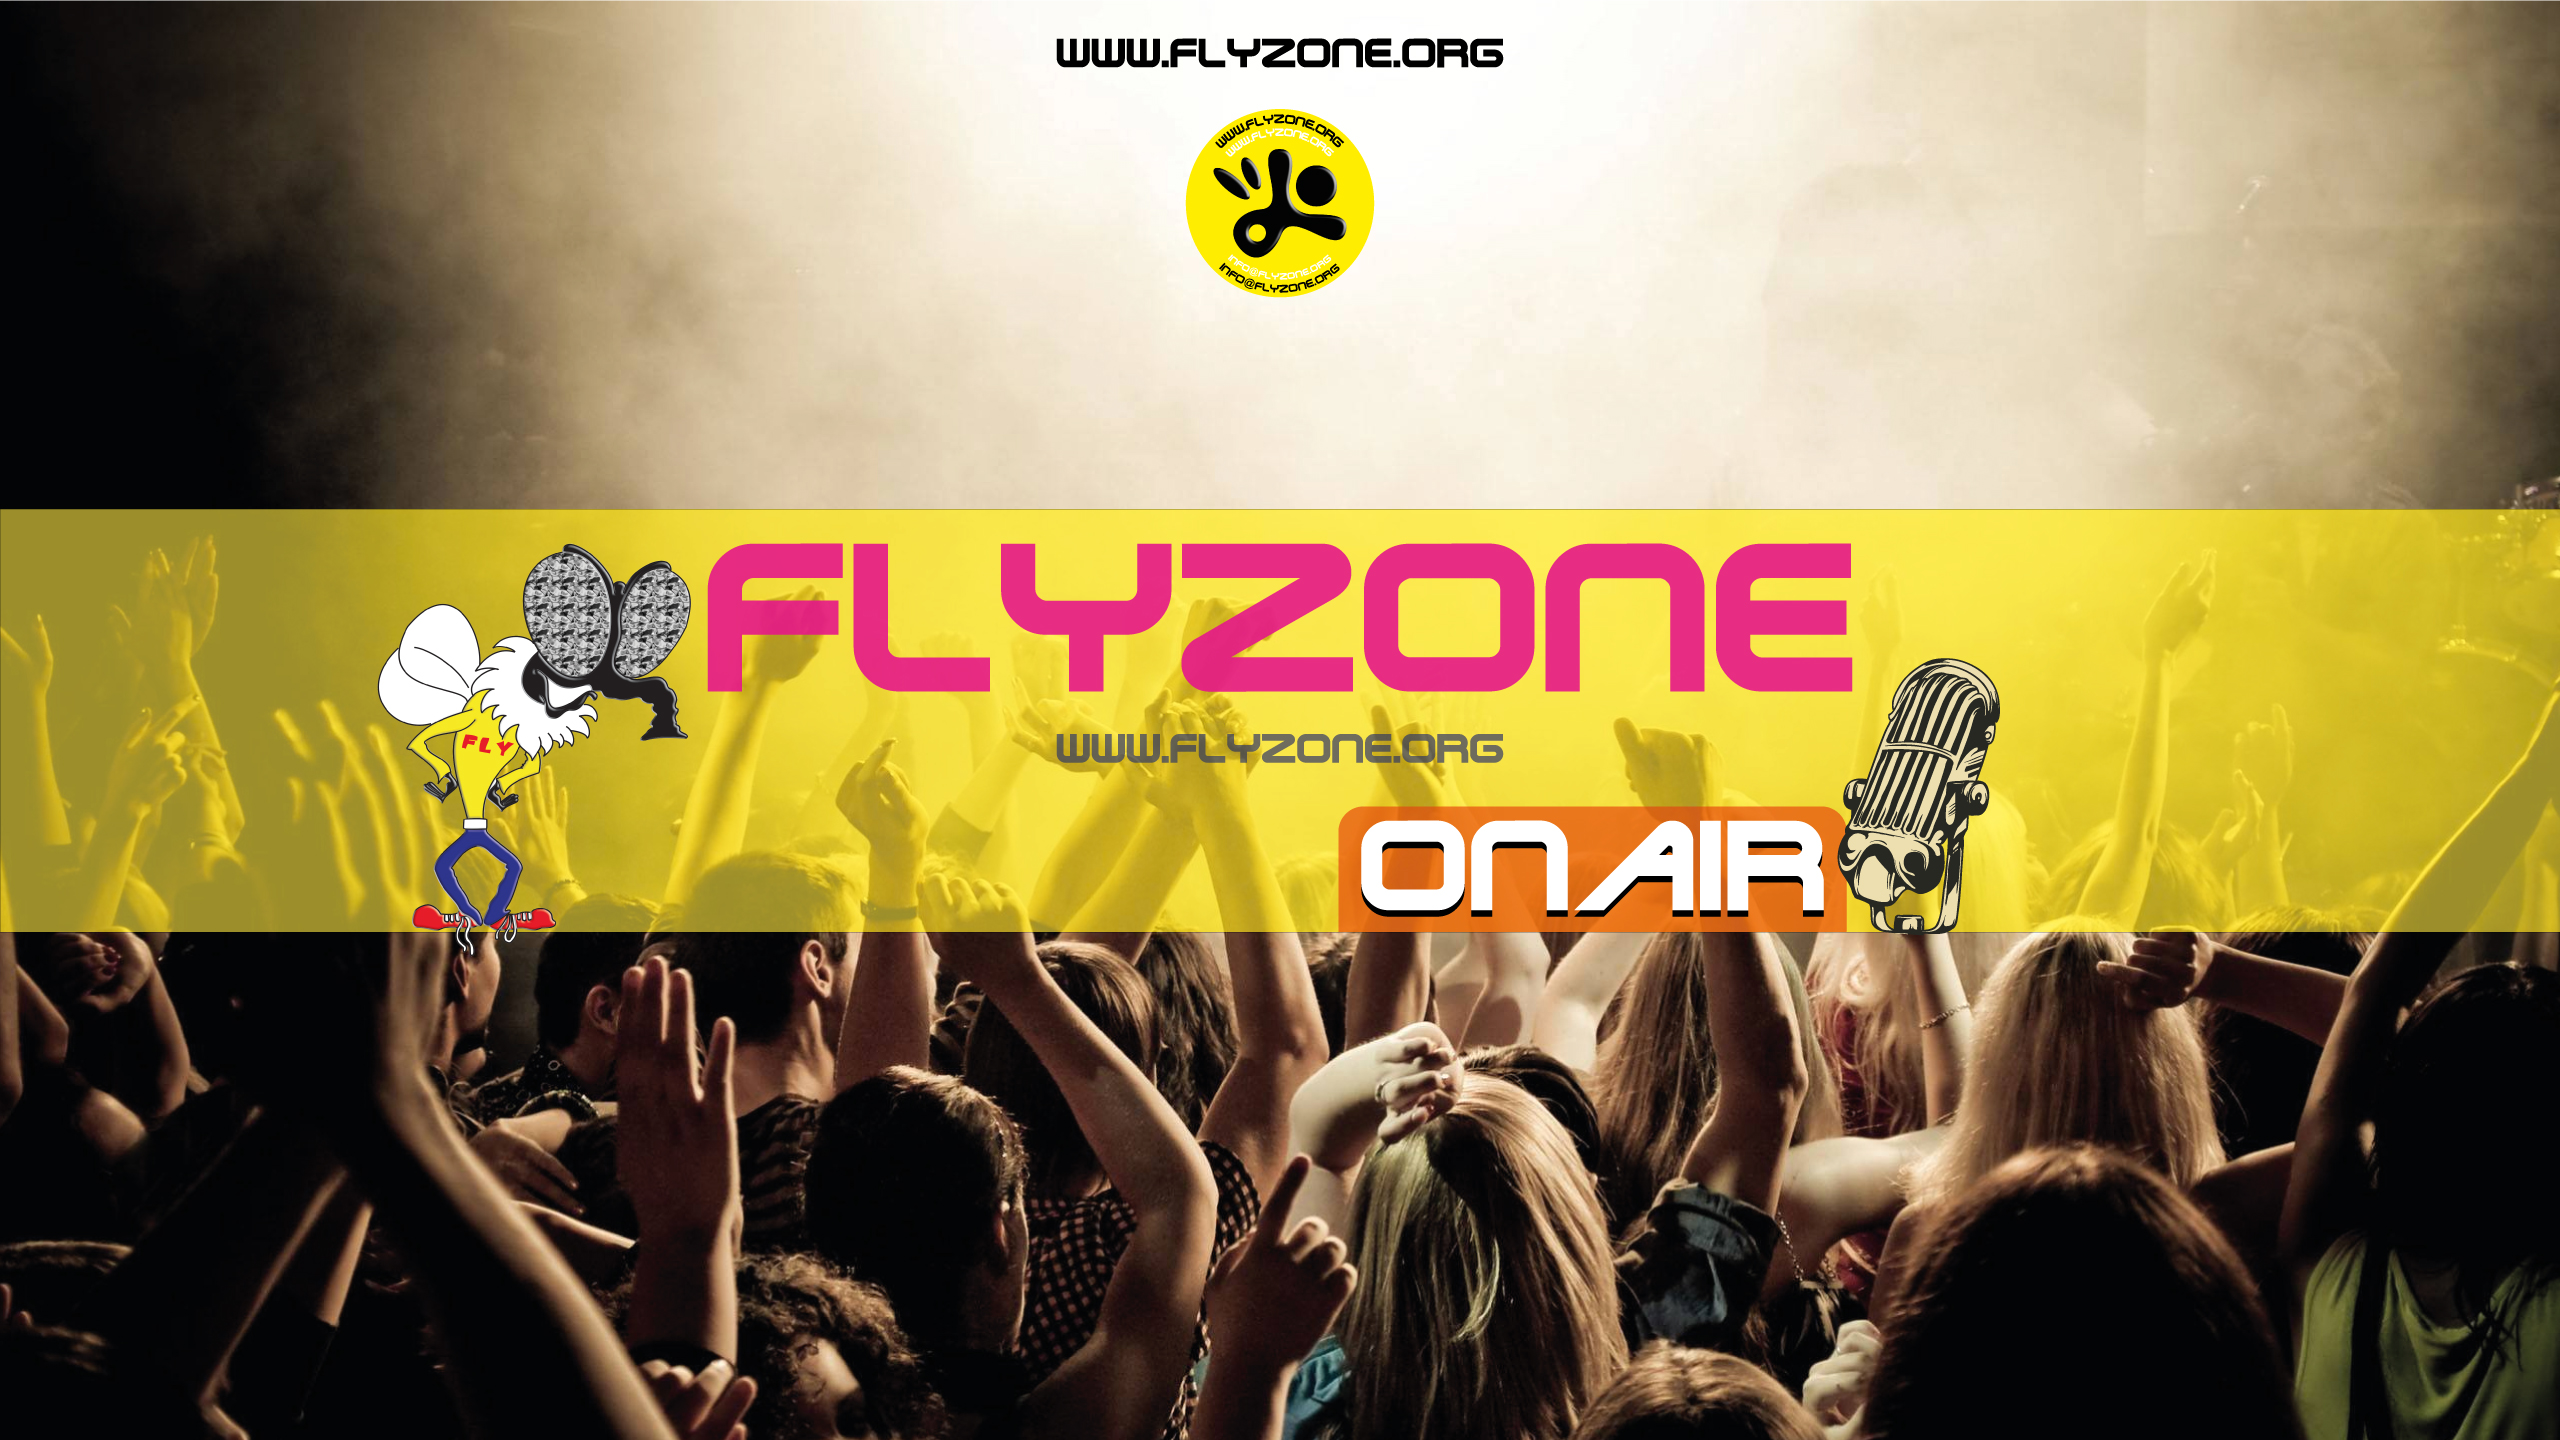 Fly zone on air